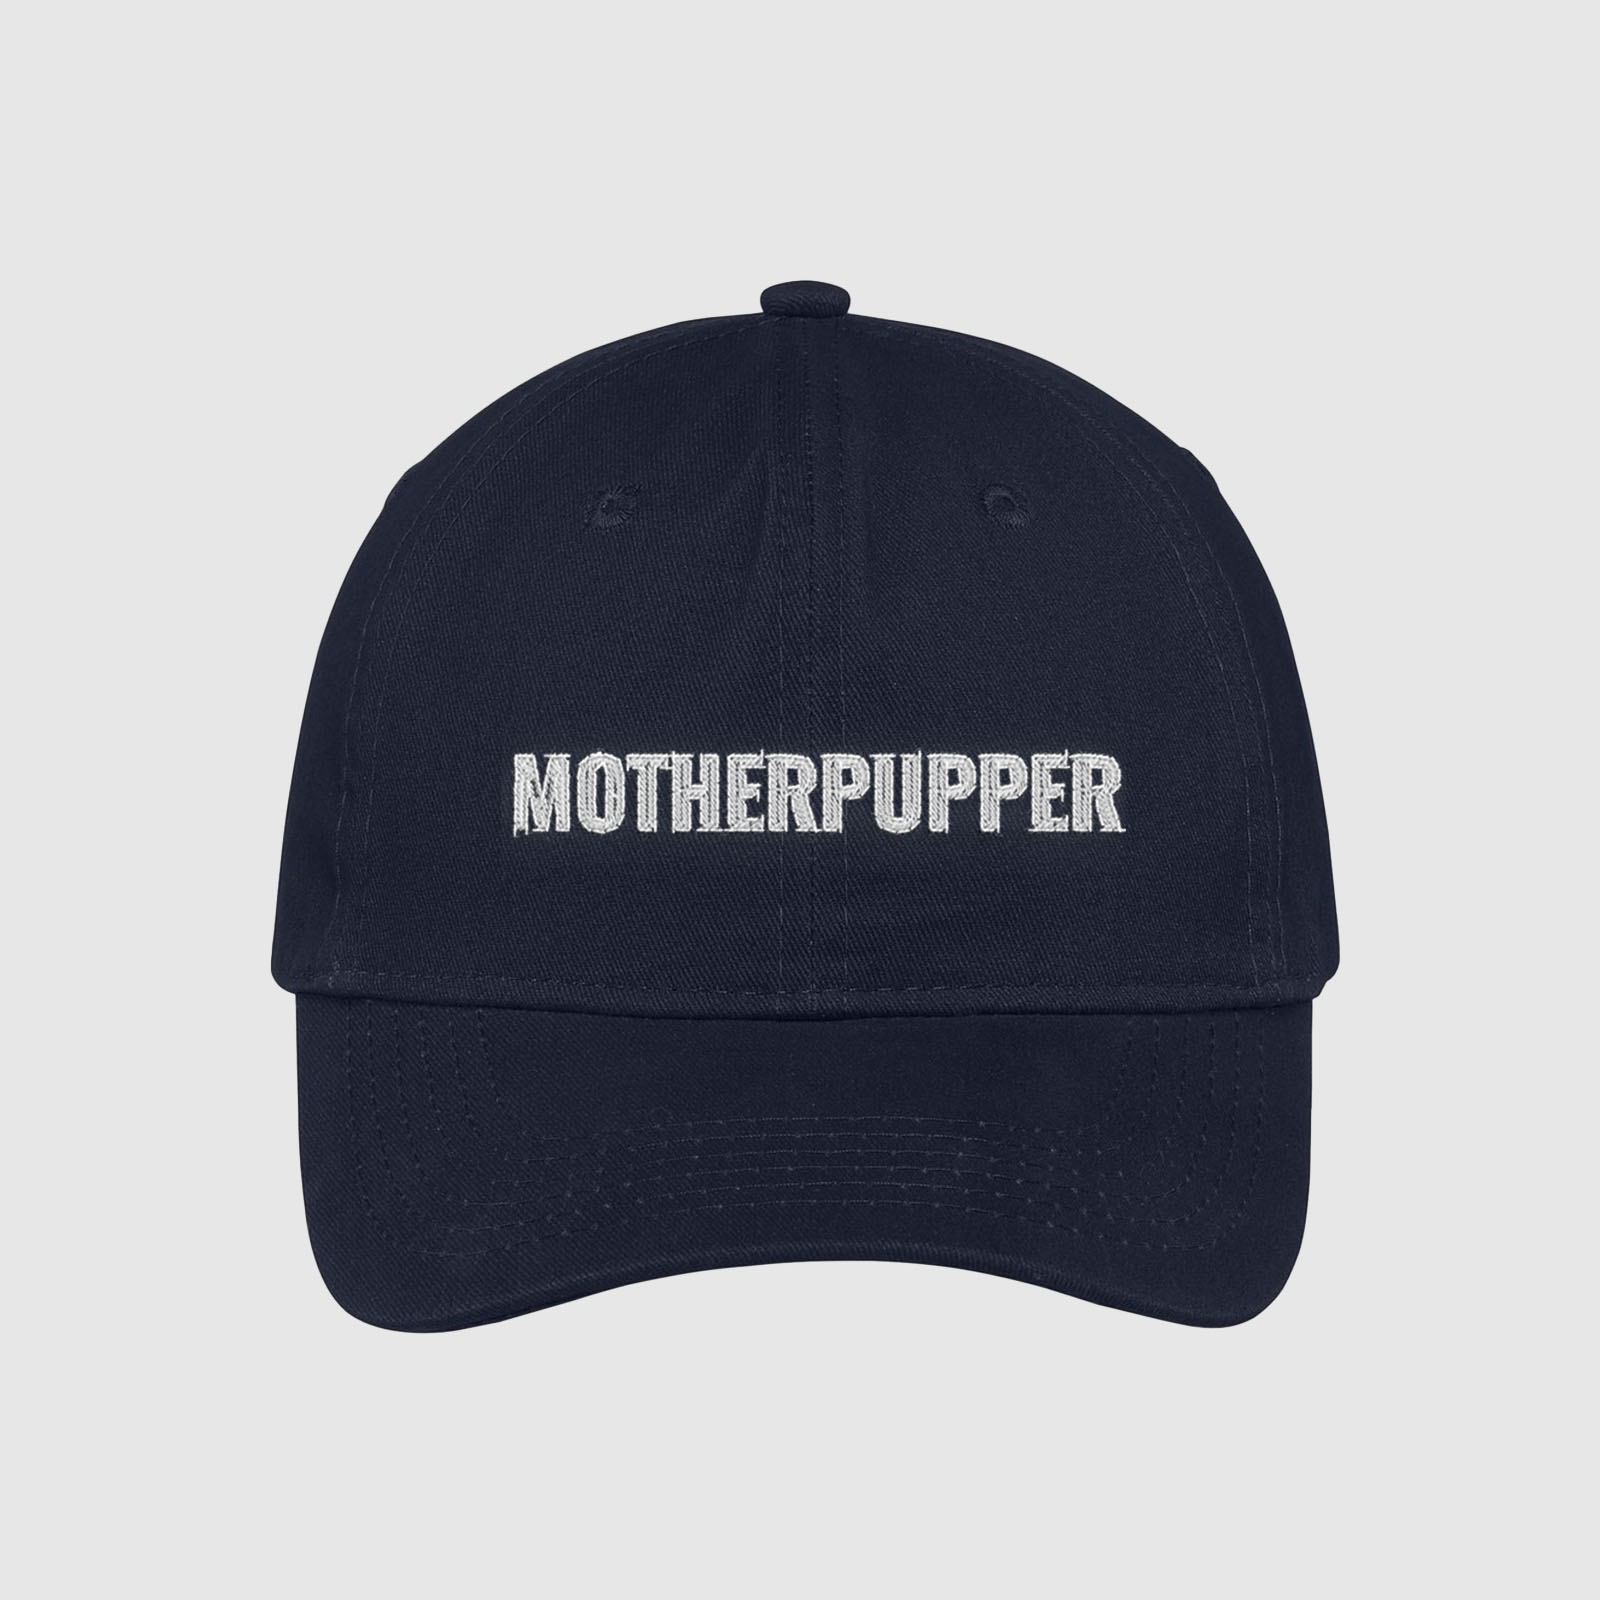 Navy Mother Pupper dad Hat for dog moms embroidered with white text.